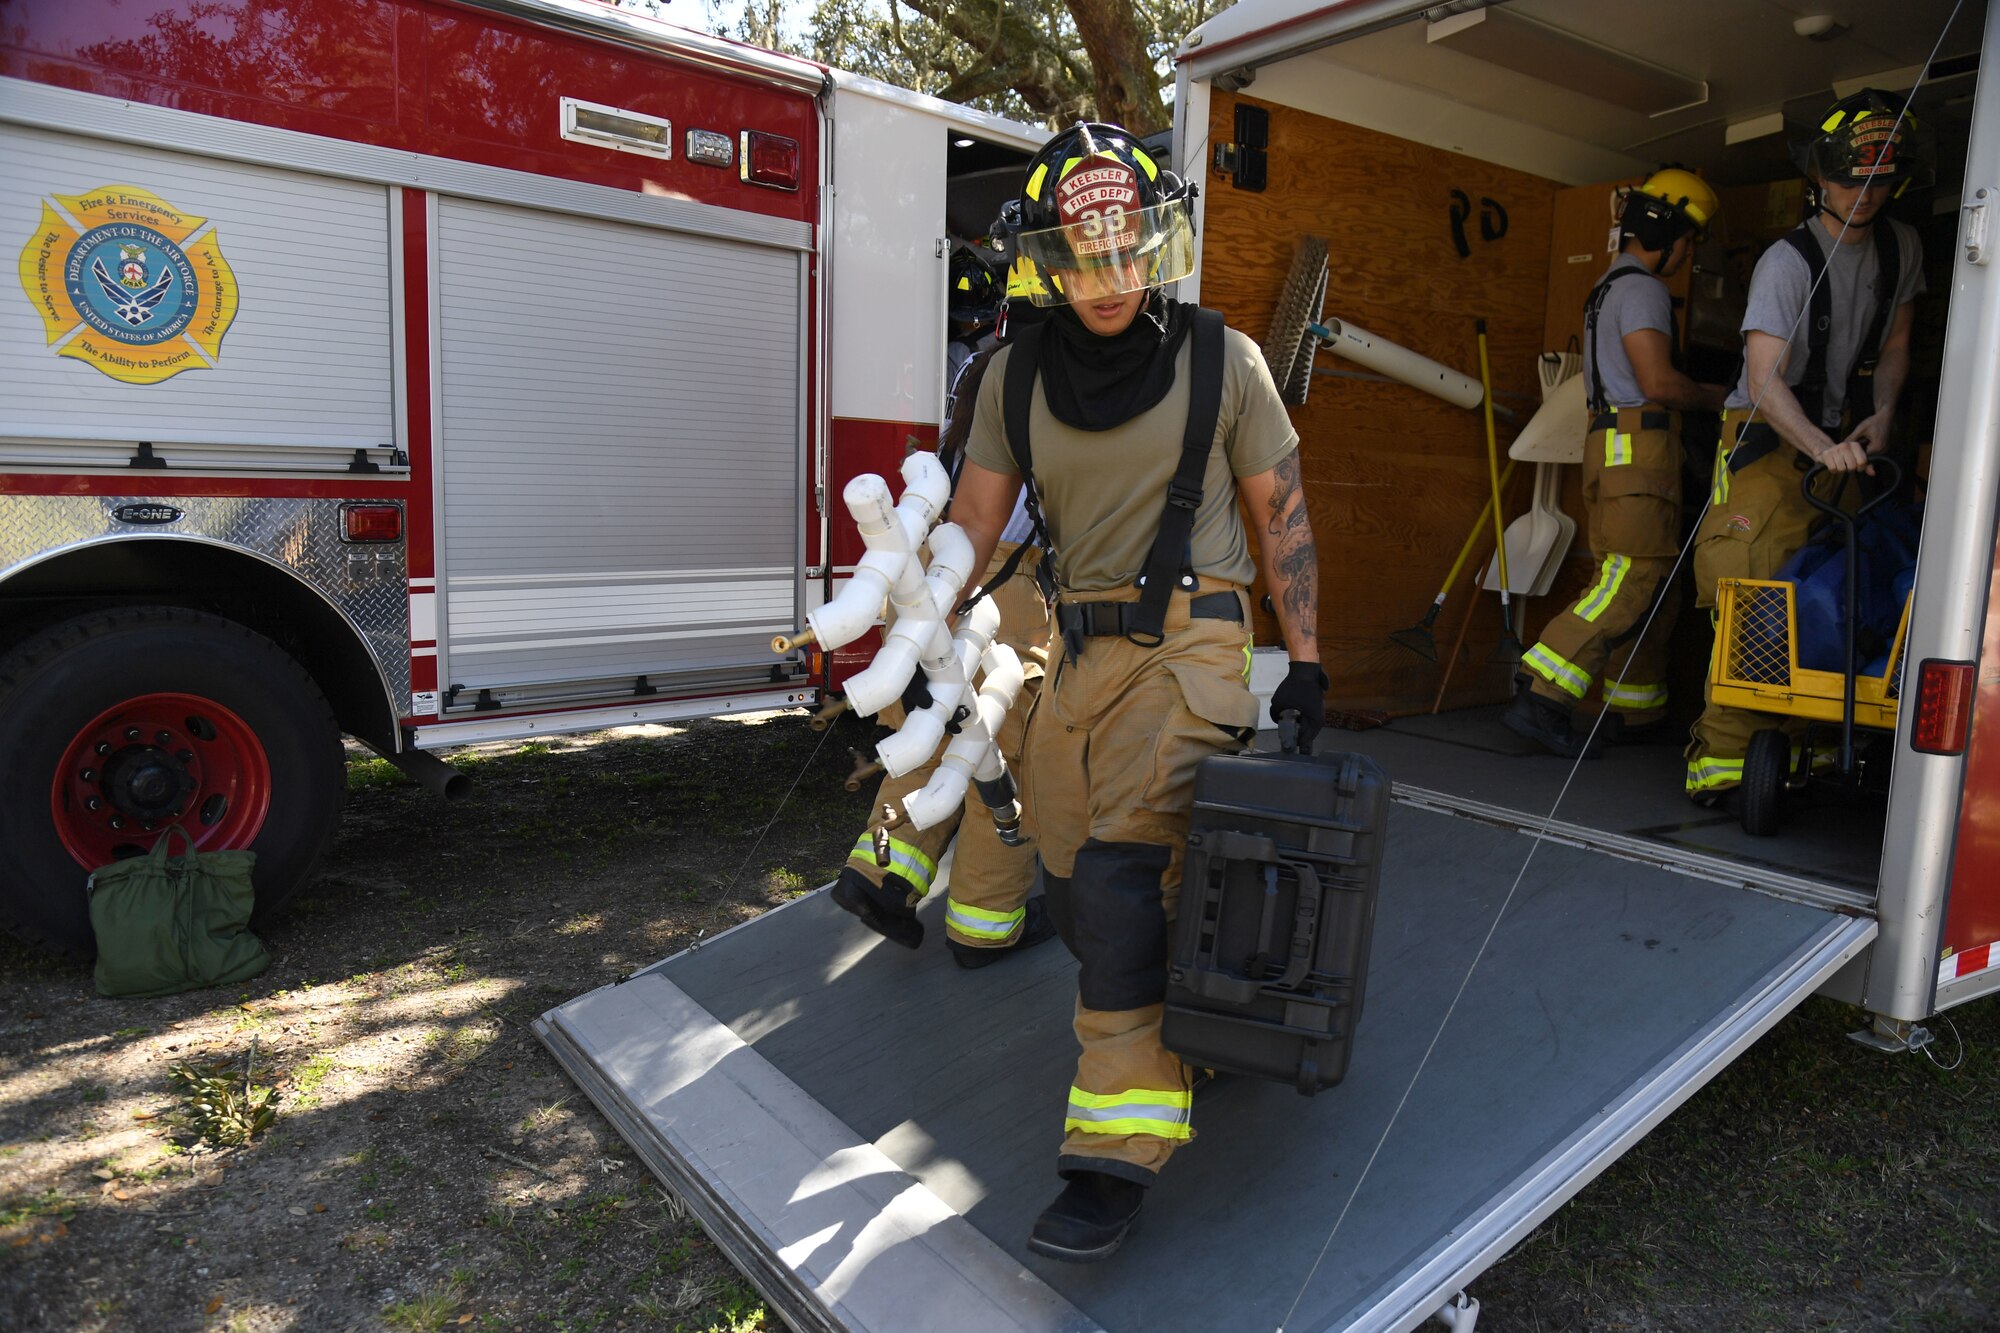 Members of the Keesler Fire Department gather equipment to set up a decontamination site during an Antiterrorism, Force Protection and Chemical, Biological, Radiological, Nuclear exercise at Keesler Air Force Base, Mississippi, March 17, 2022. The exercise tested the base's ability to respond to and recover from a mass casualty event. (U.S. Air Force photo by Kemberly Groue)